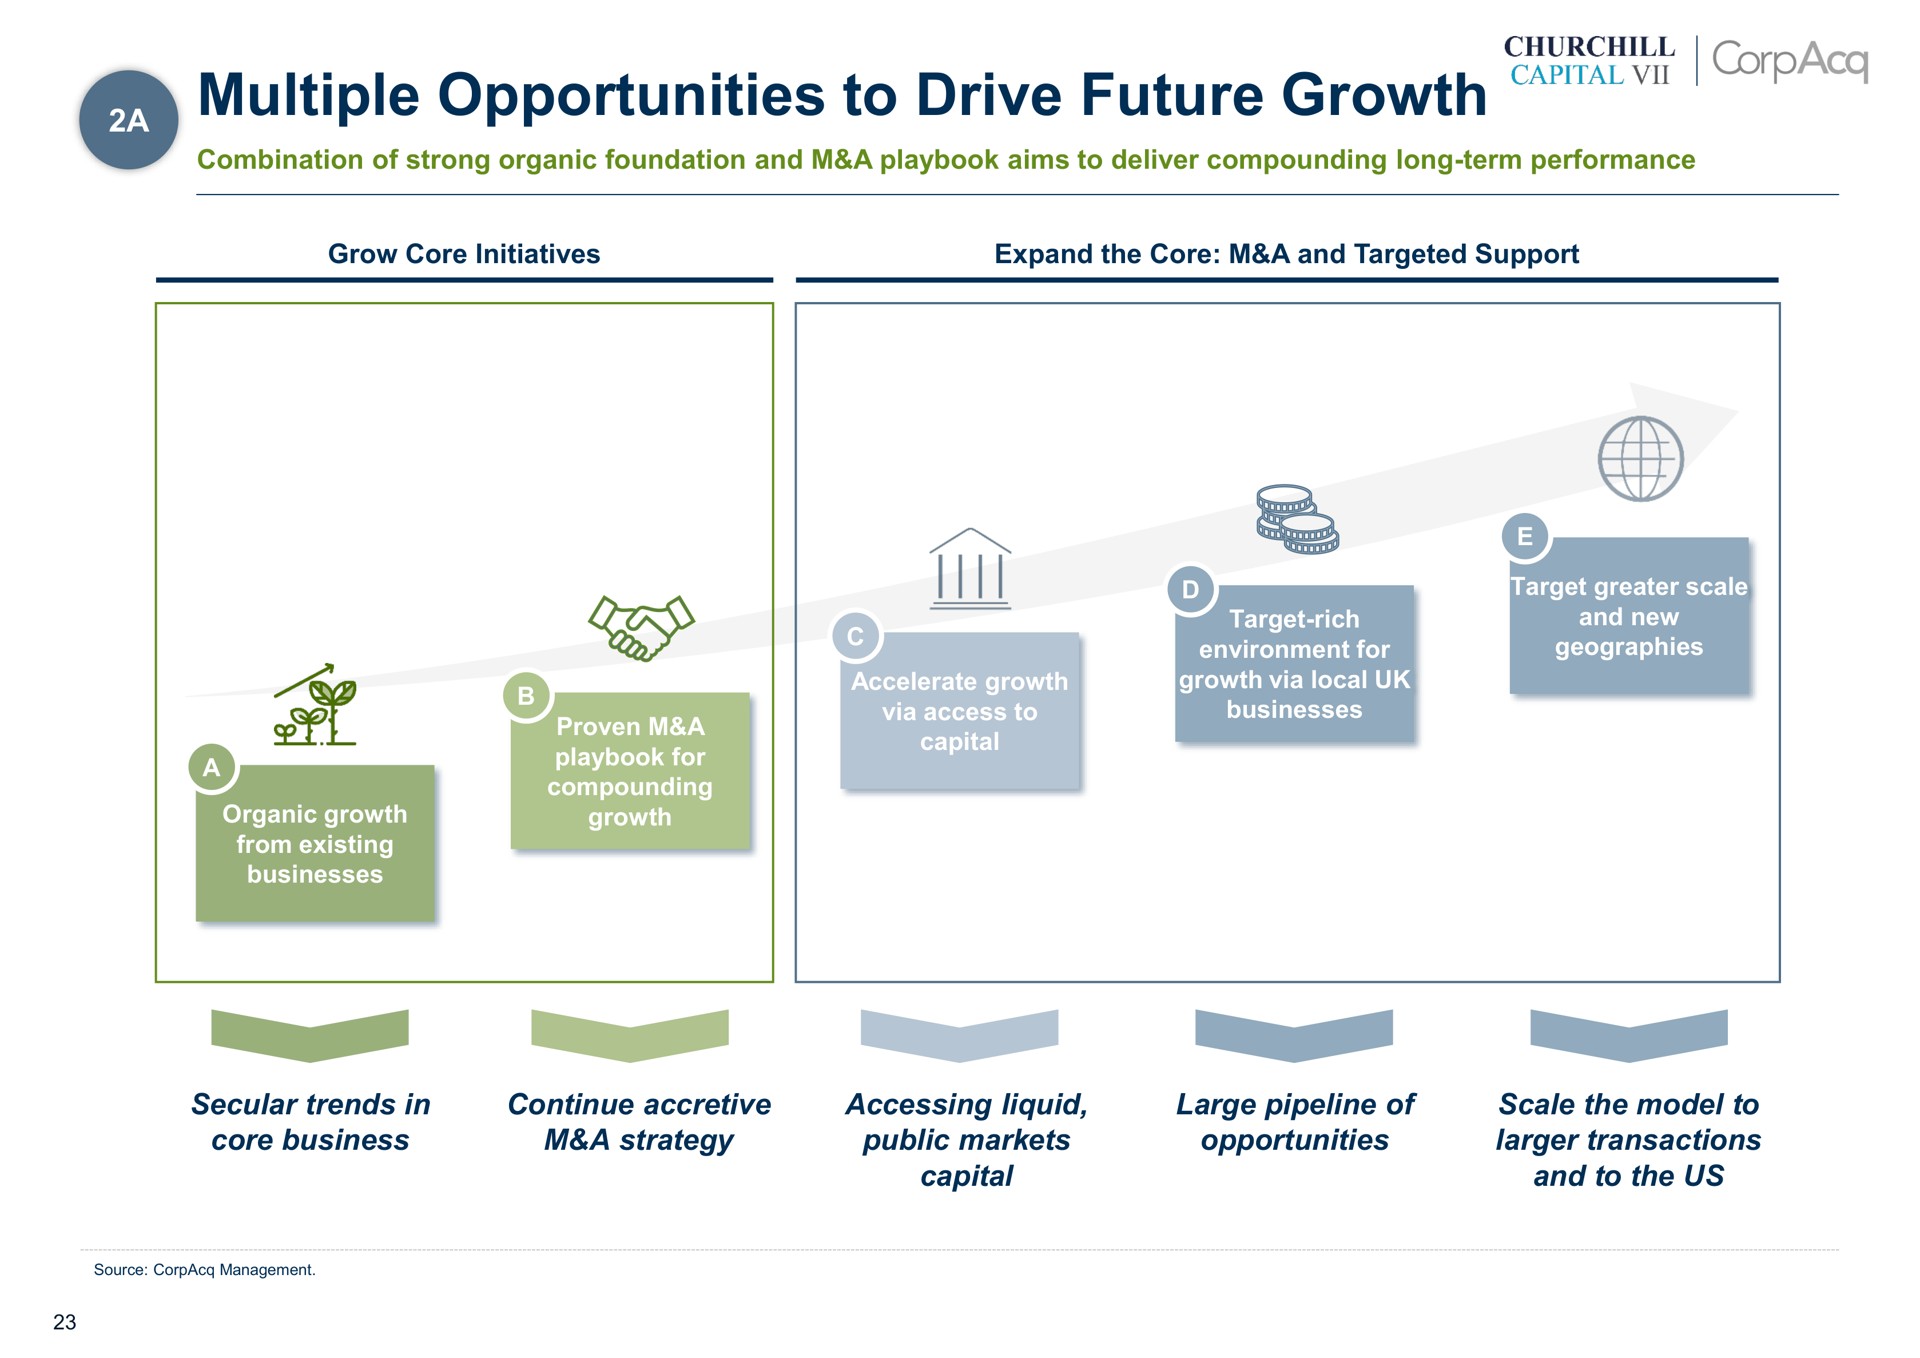 a multiple opportunities to drive future growth | CorpAcq